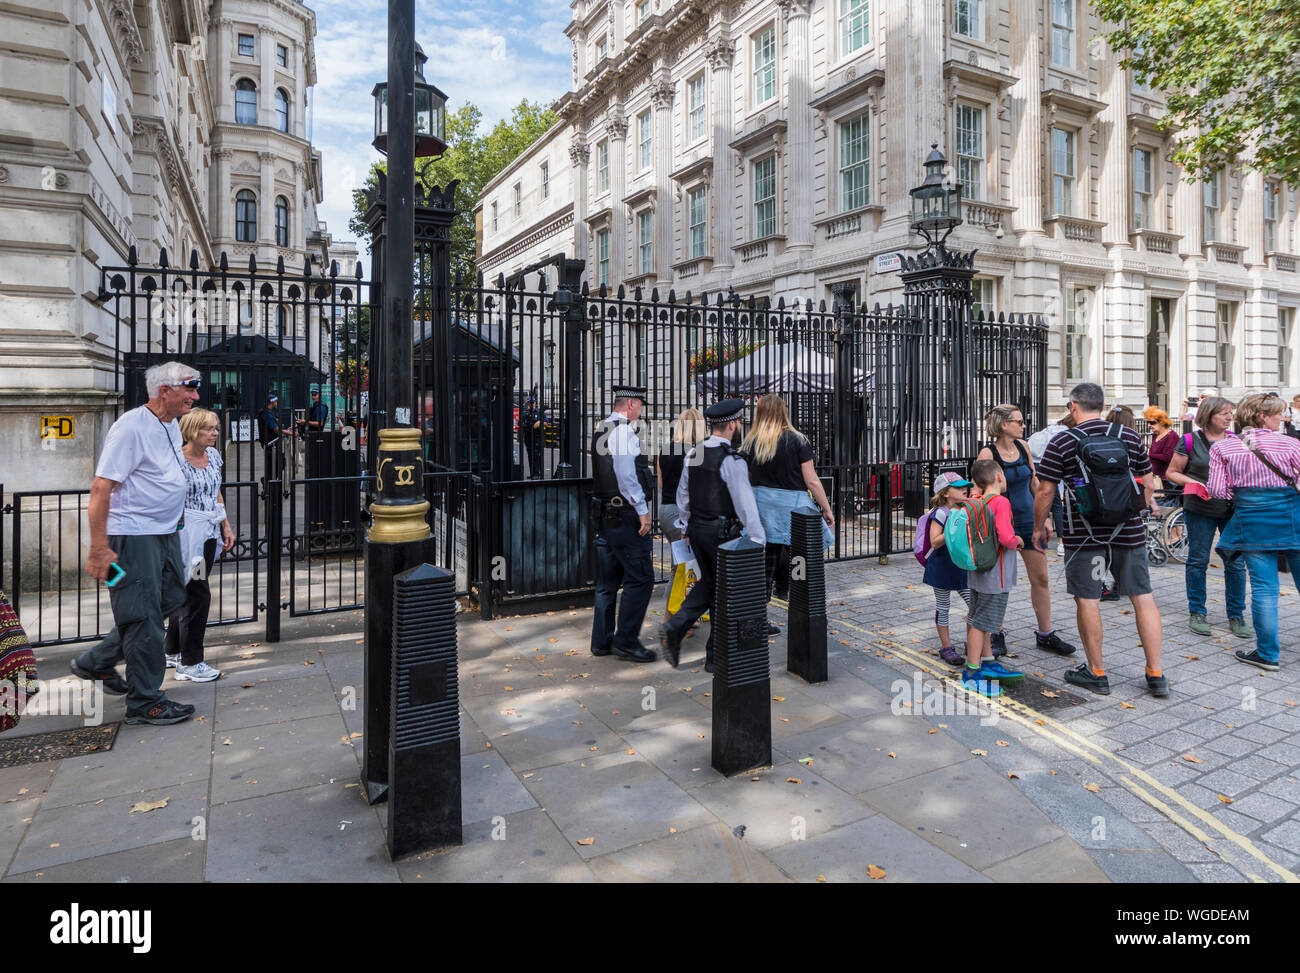 Police guarded security gate at the entrance to Downing Street, City of Westminster, London, England, UK. Stock Photo